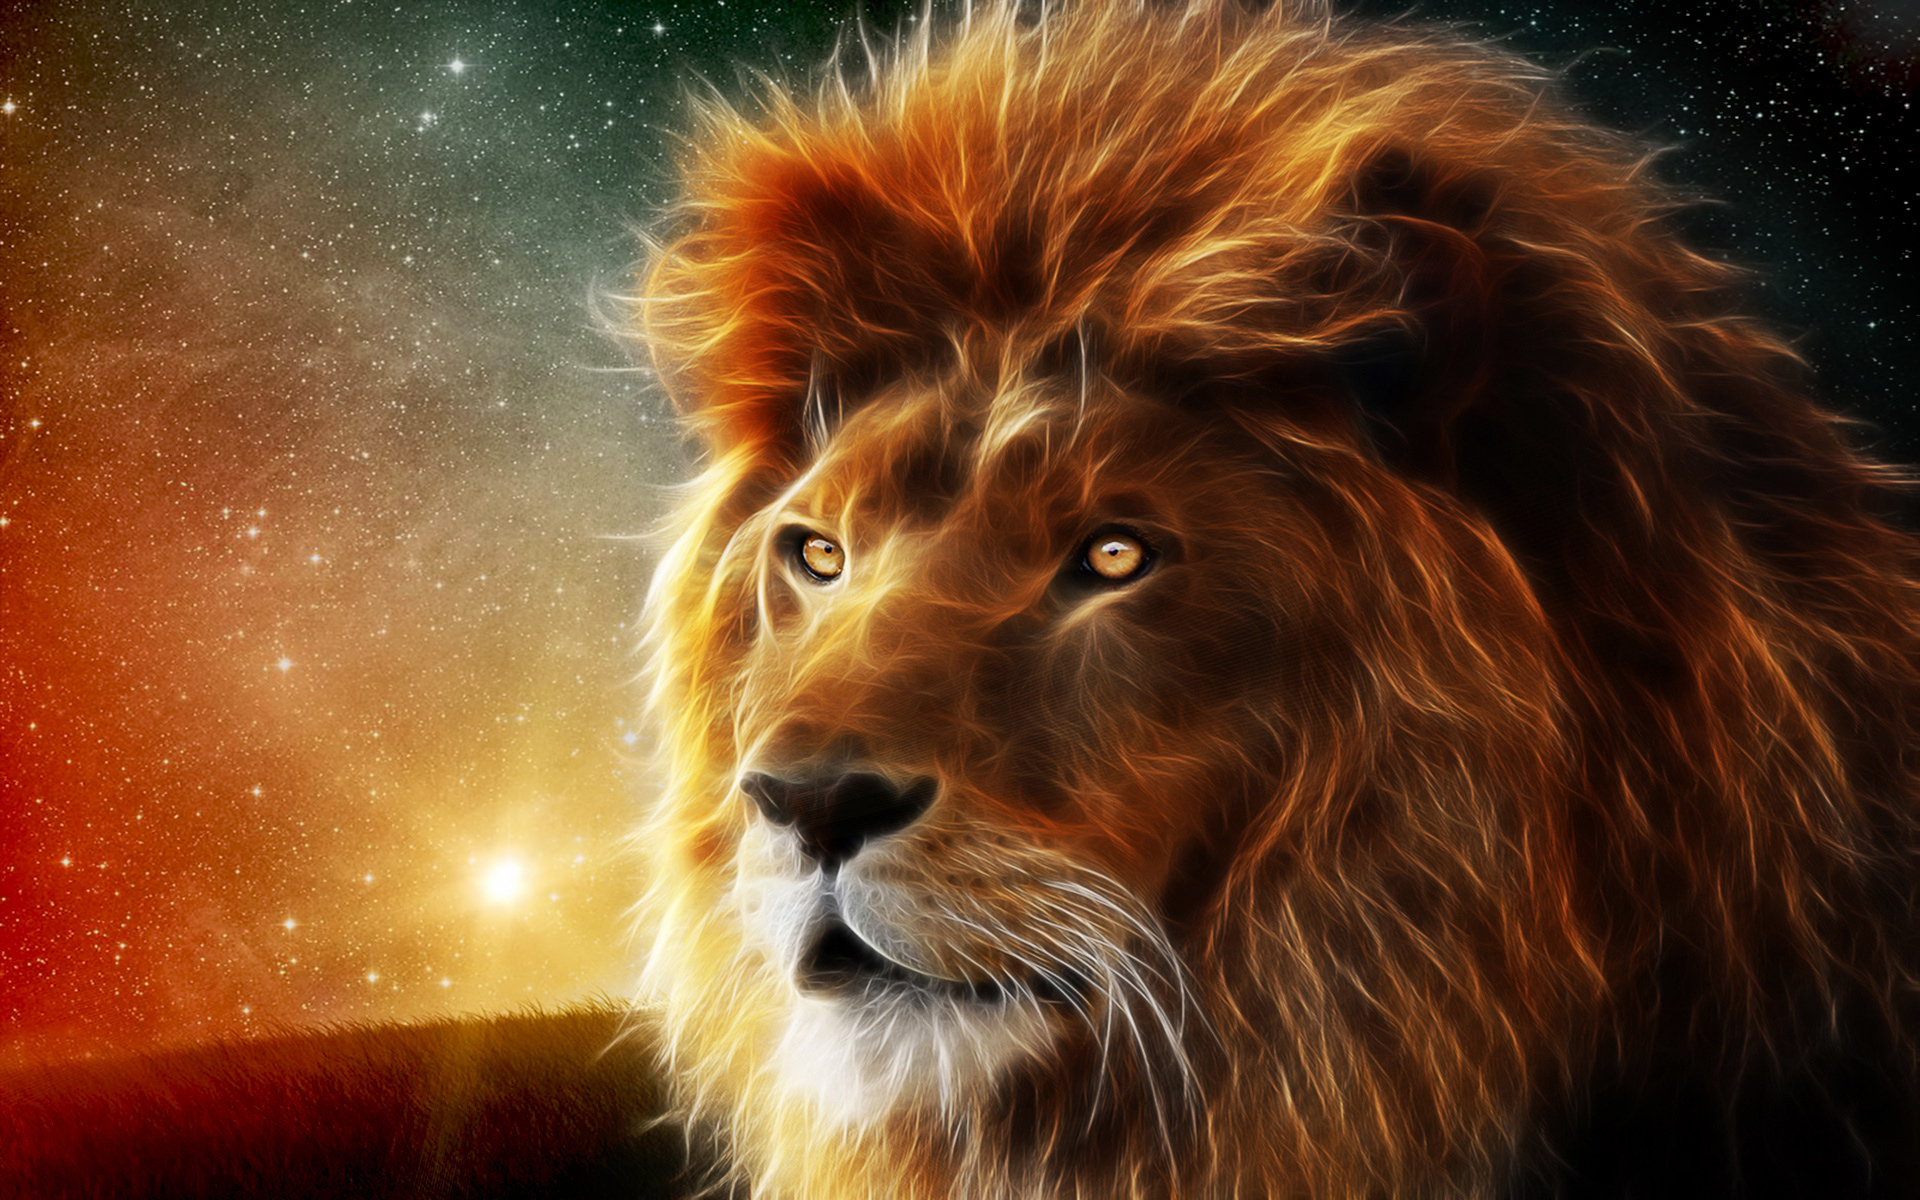 Lion wallpapers hd